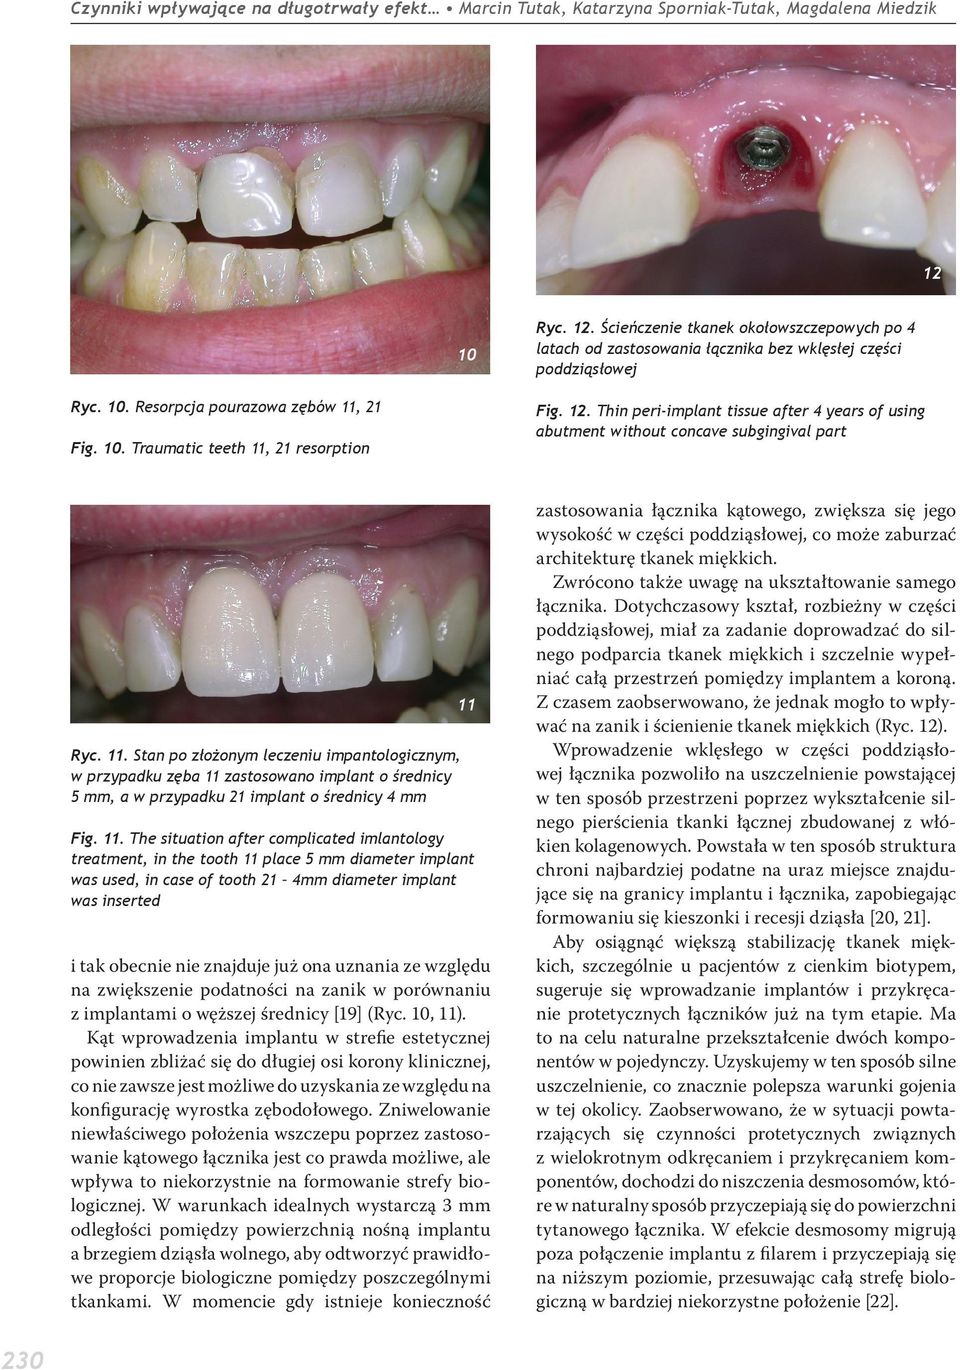 12. Thin peri-implant tissue after 4 years of using abutment without concave subgingival part Ryc. 11.